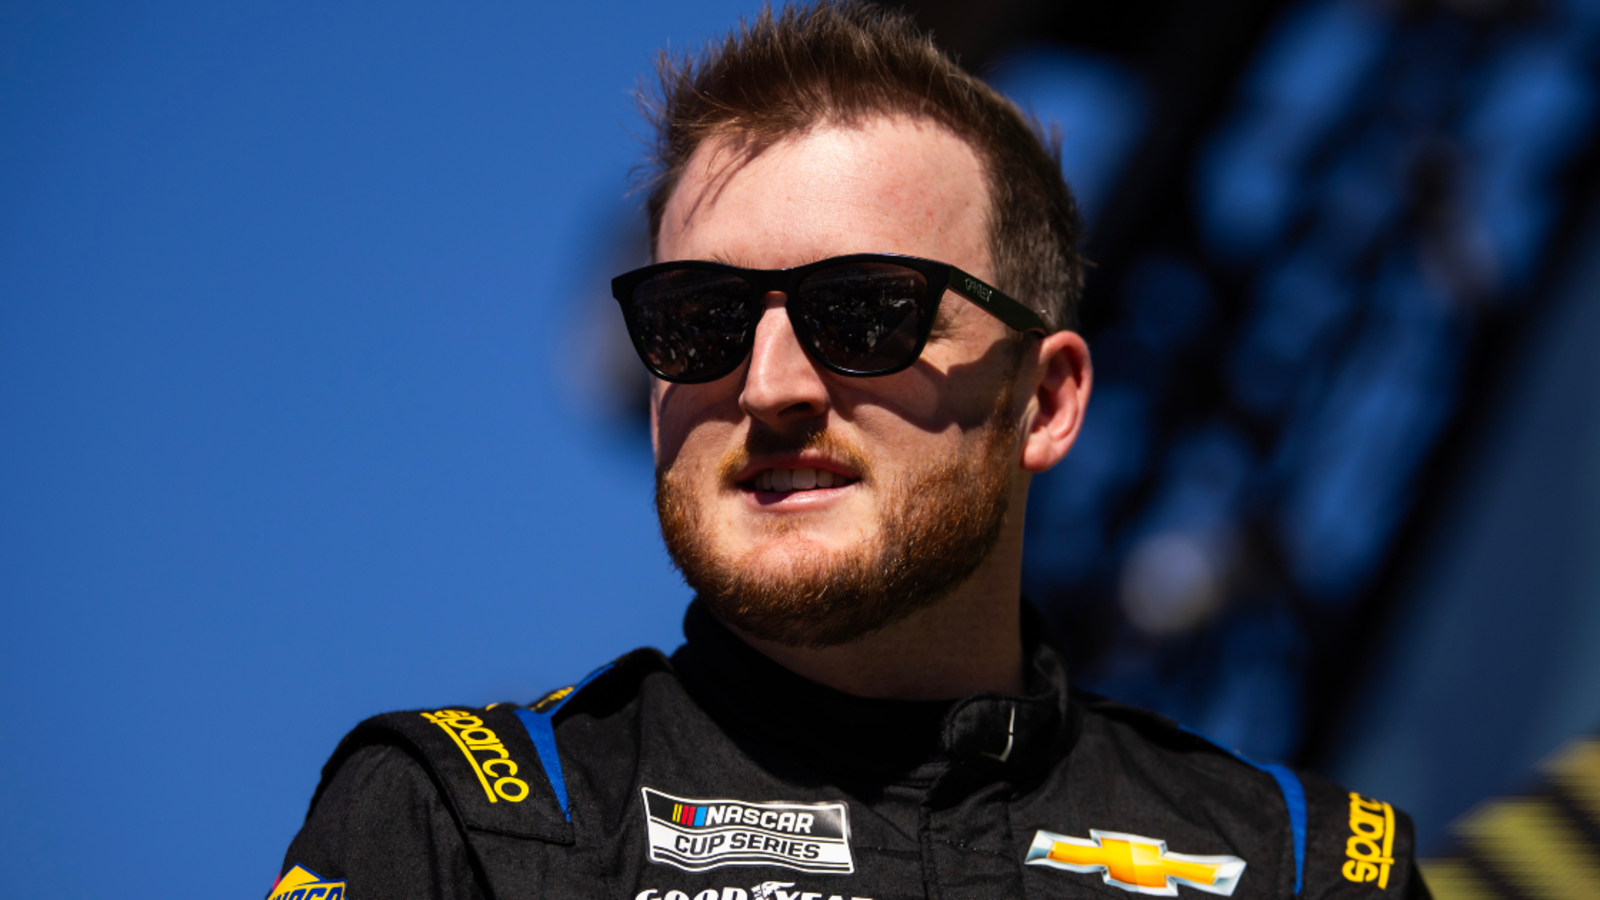 Ty Dillon to drive full-time Truck Series schedule for Rackley WAR, replacing Matt DiBenedetto